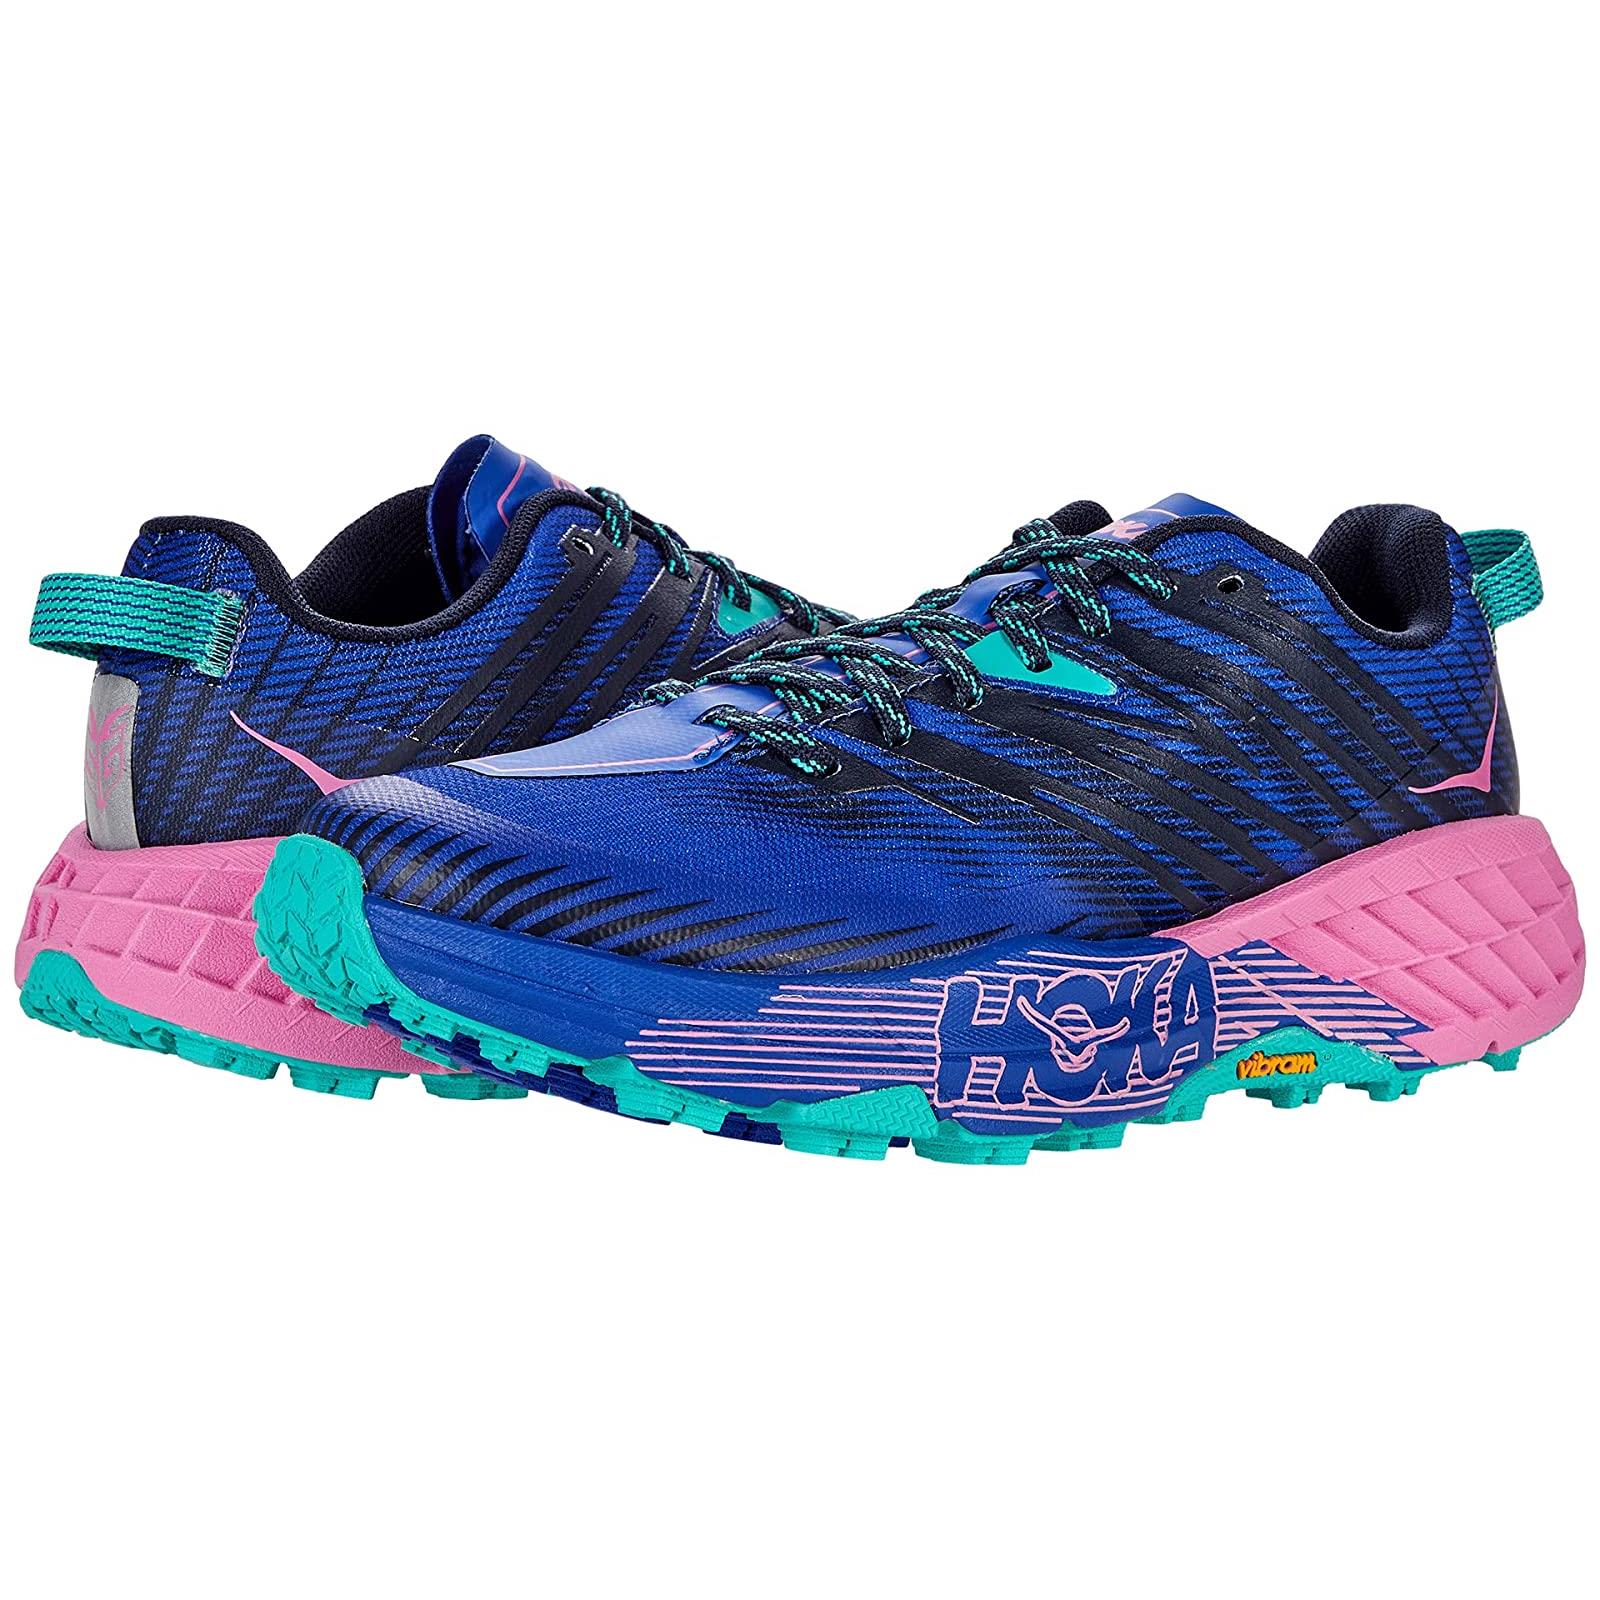 Woman`s Sneakers Athletic Shoes Hoka One One Speedgoat 4 Dazzling Blue/Phlox Pink